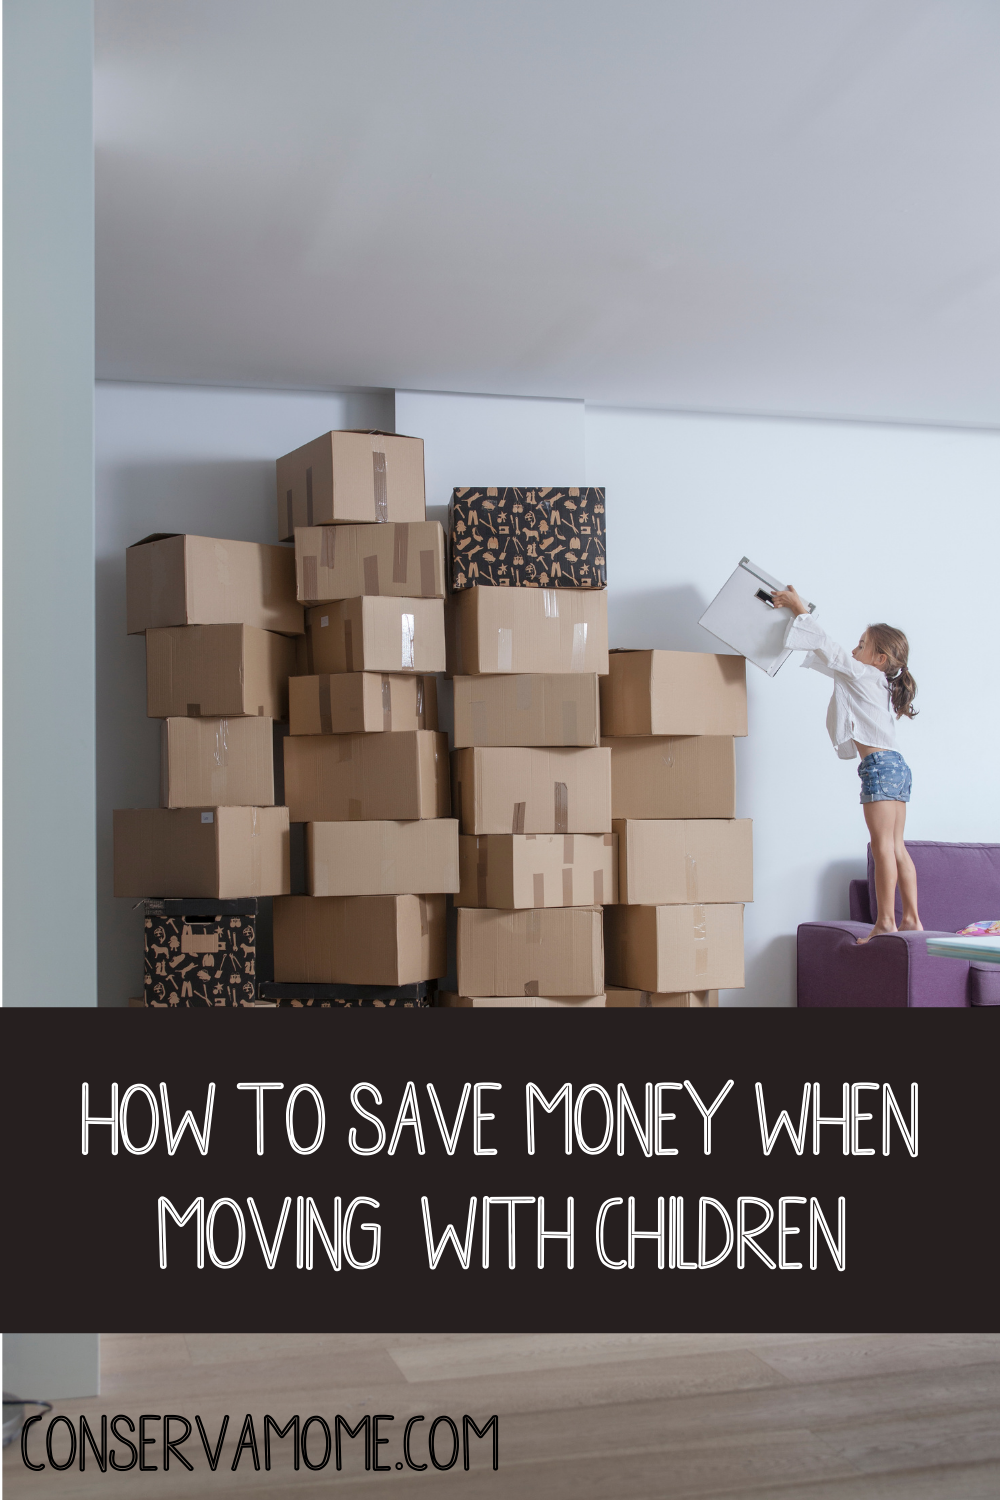 How To Save Money When Moving With Children